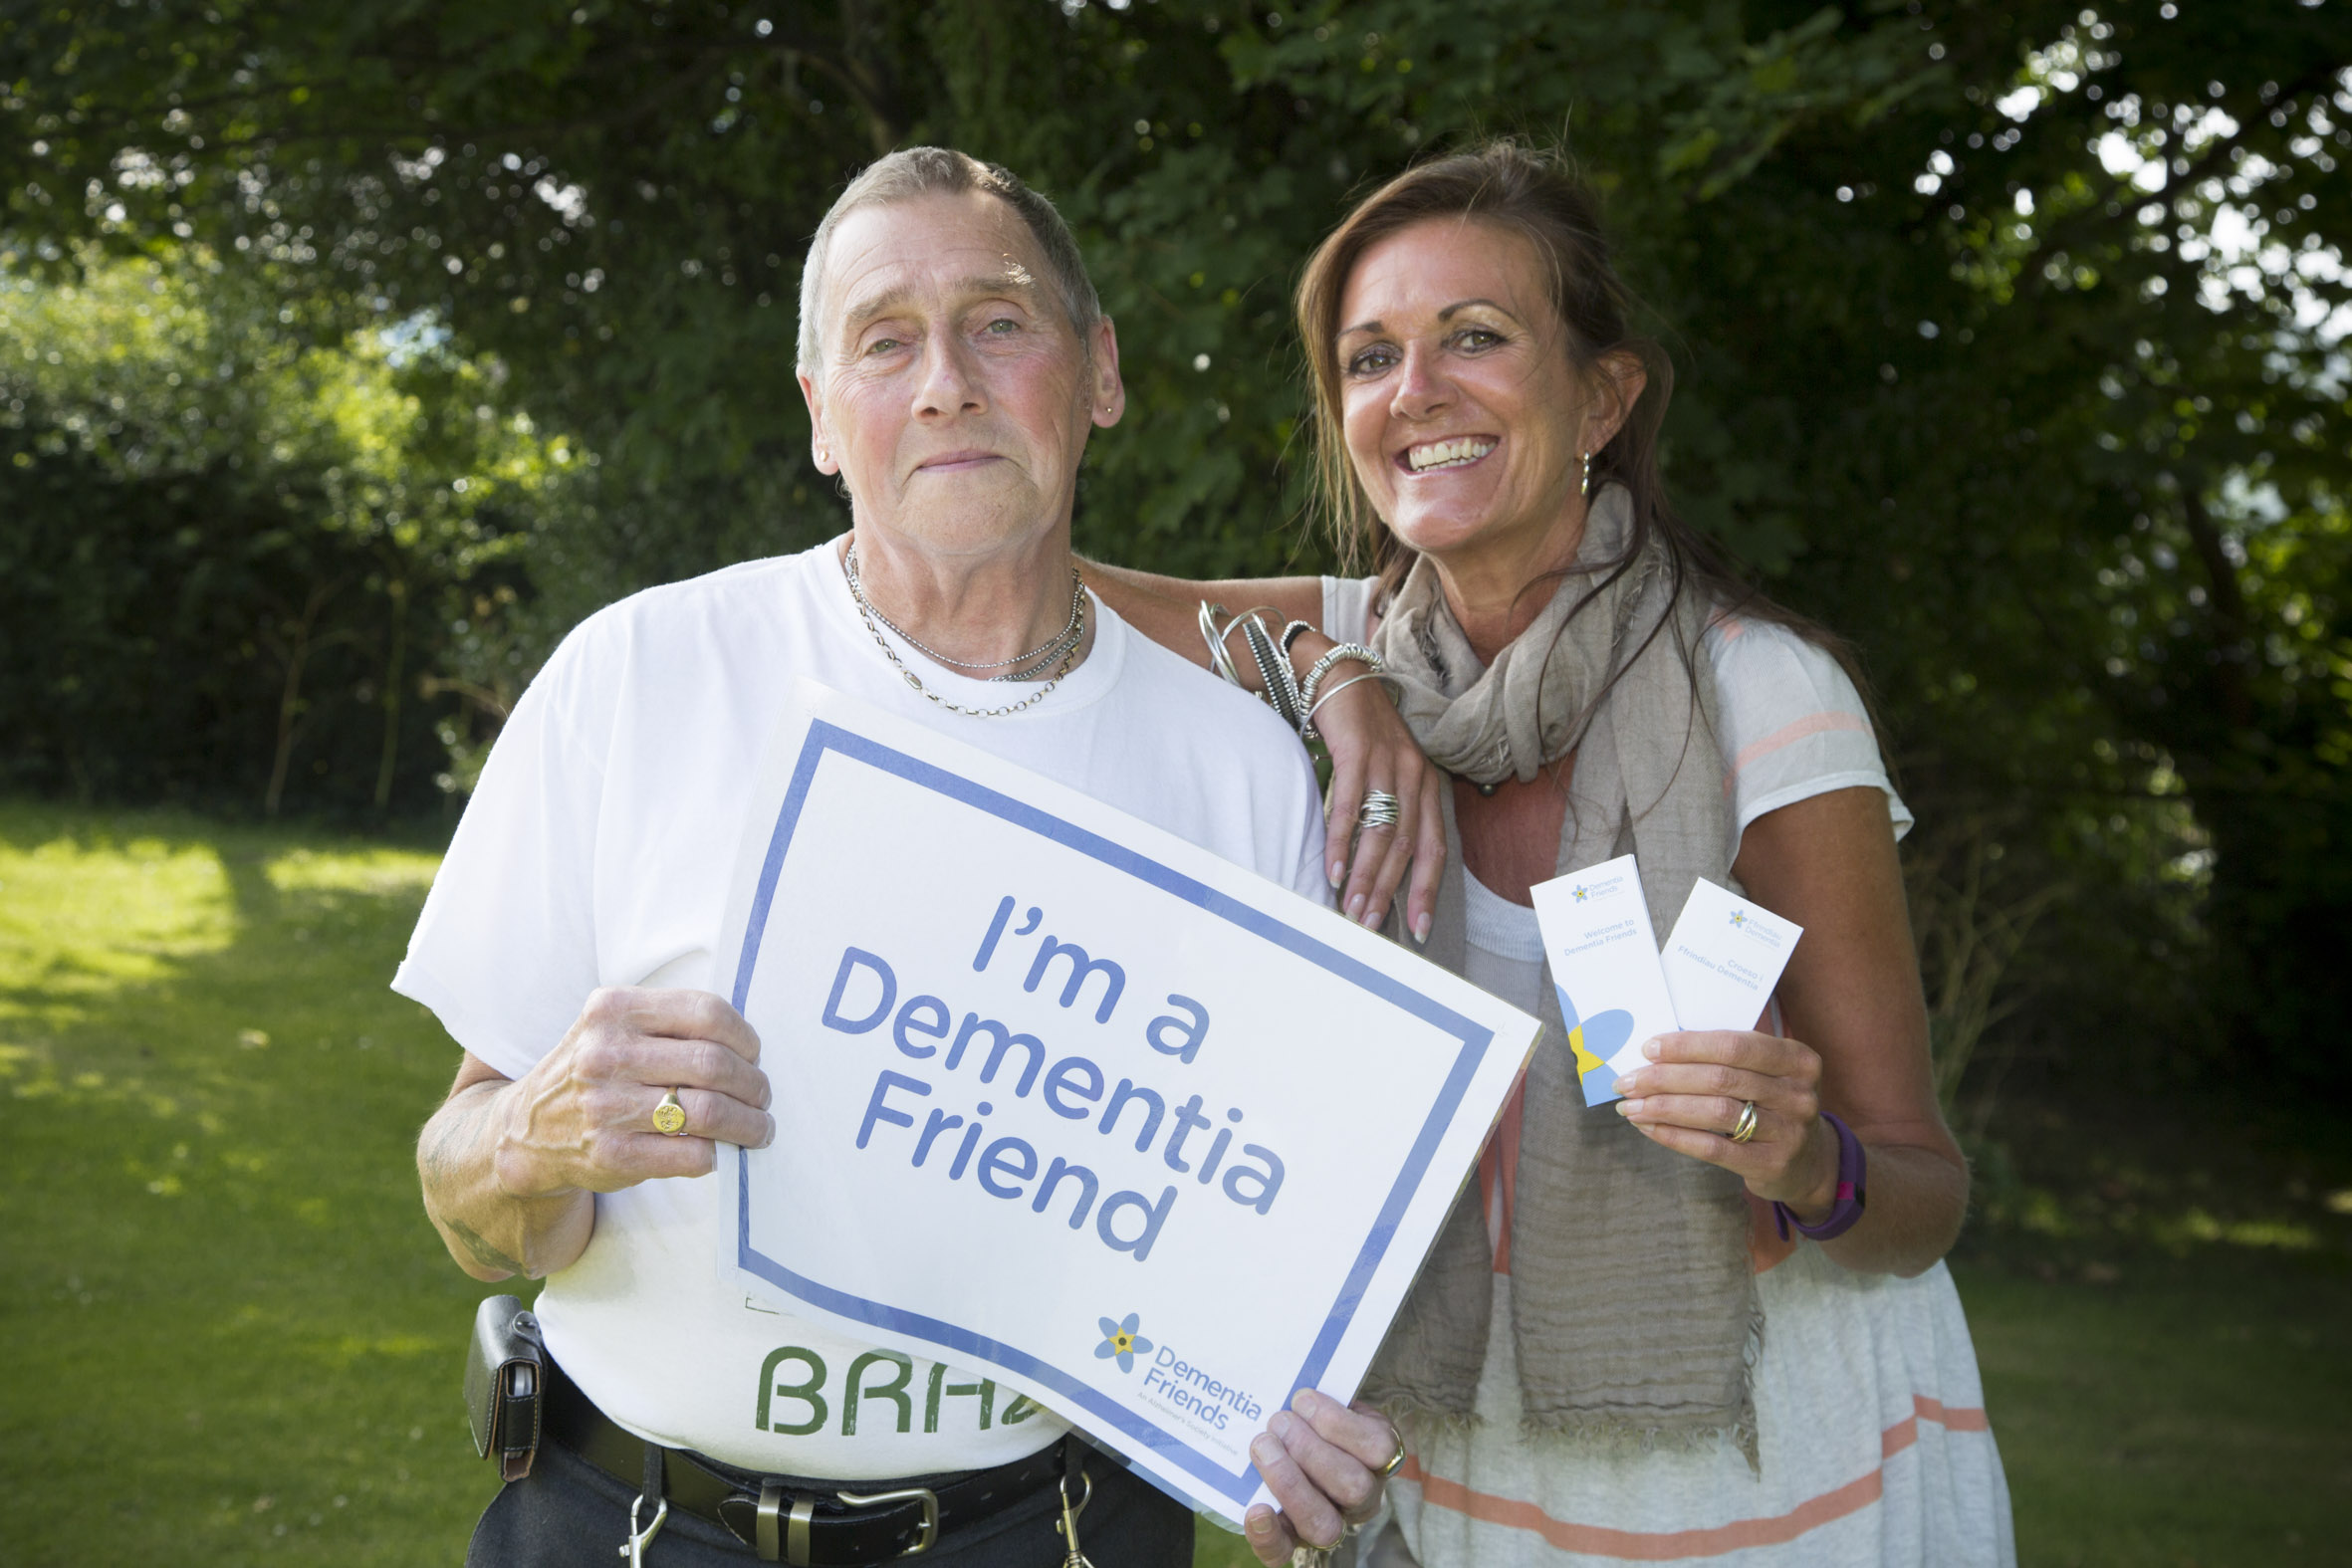 Cartrefi Conwy on a mission to create army of dementia friends